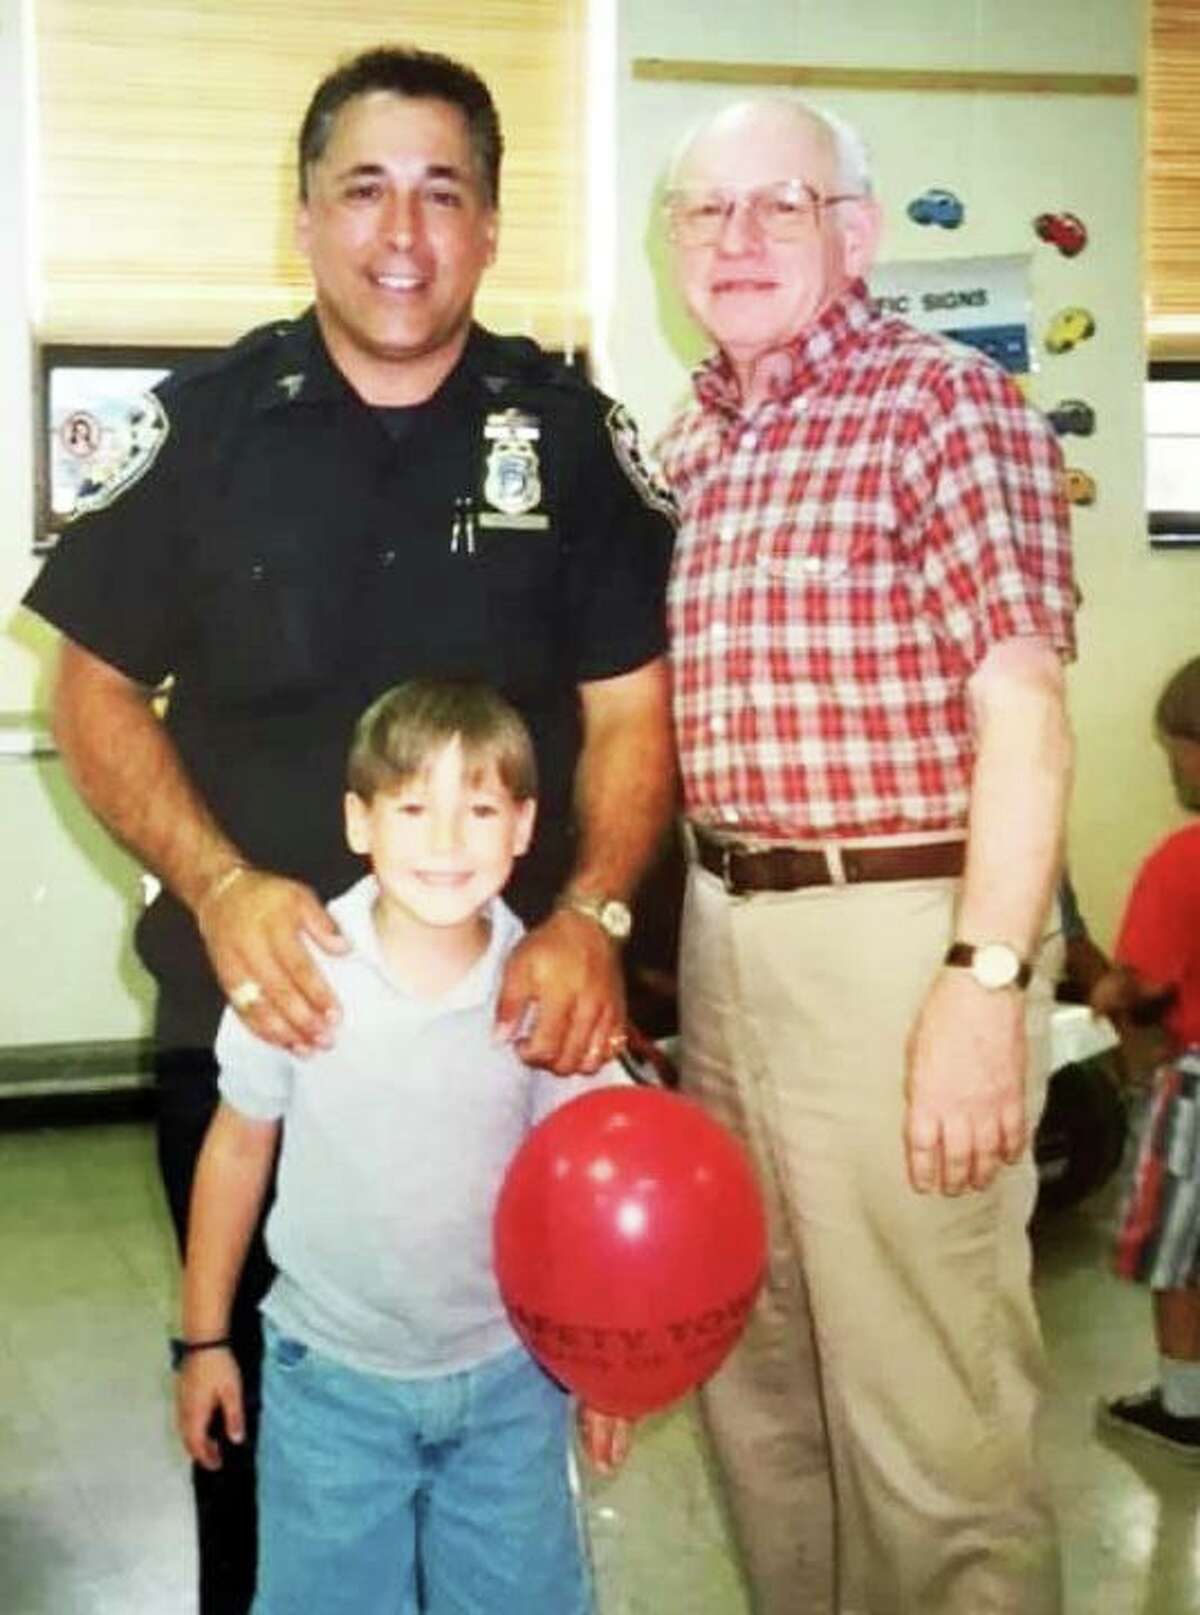 Middletown Common Council Minority Leader Phil Pessina, left, and the late Clayton Hewitt, right, a former Middletown police officer, are shown with Hewitt’s grandson during the late 1970s to early 1980s during a Safety Town graduation.